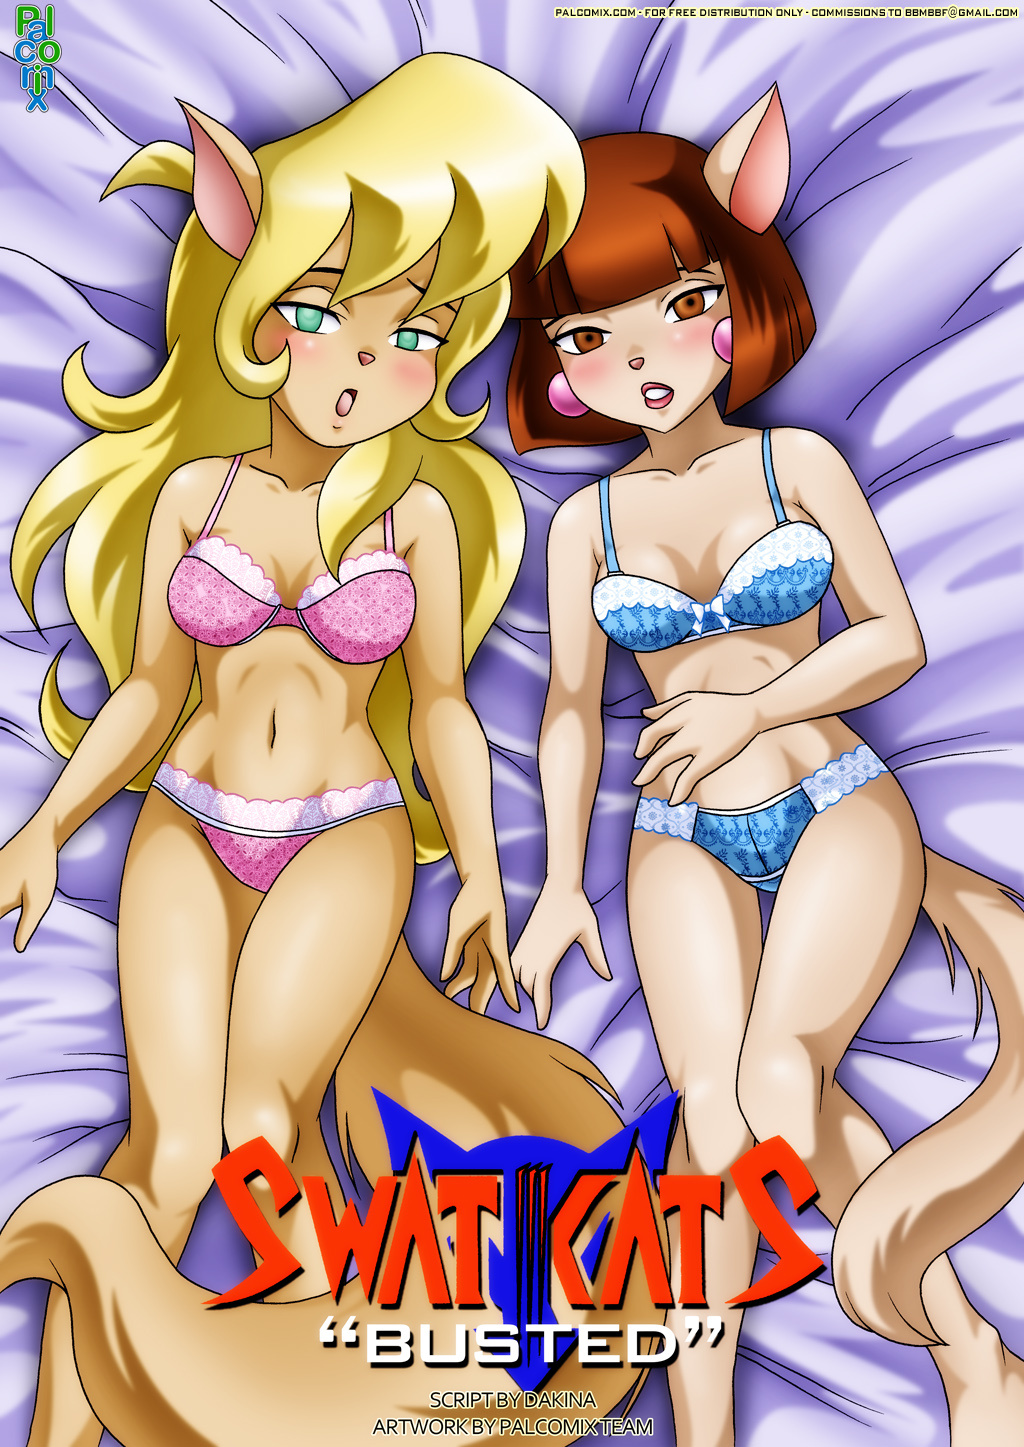 Swat Kats Busted porn comics Oral sex, Furry, Stockings